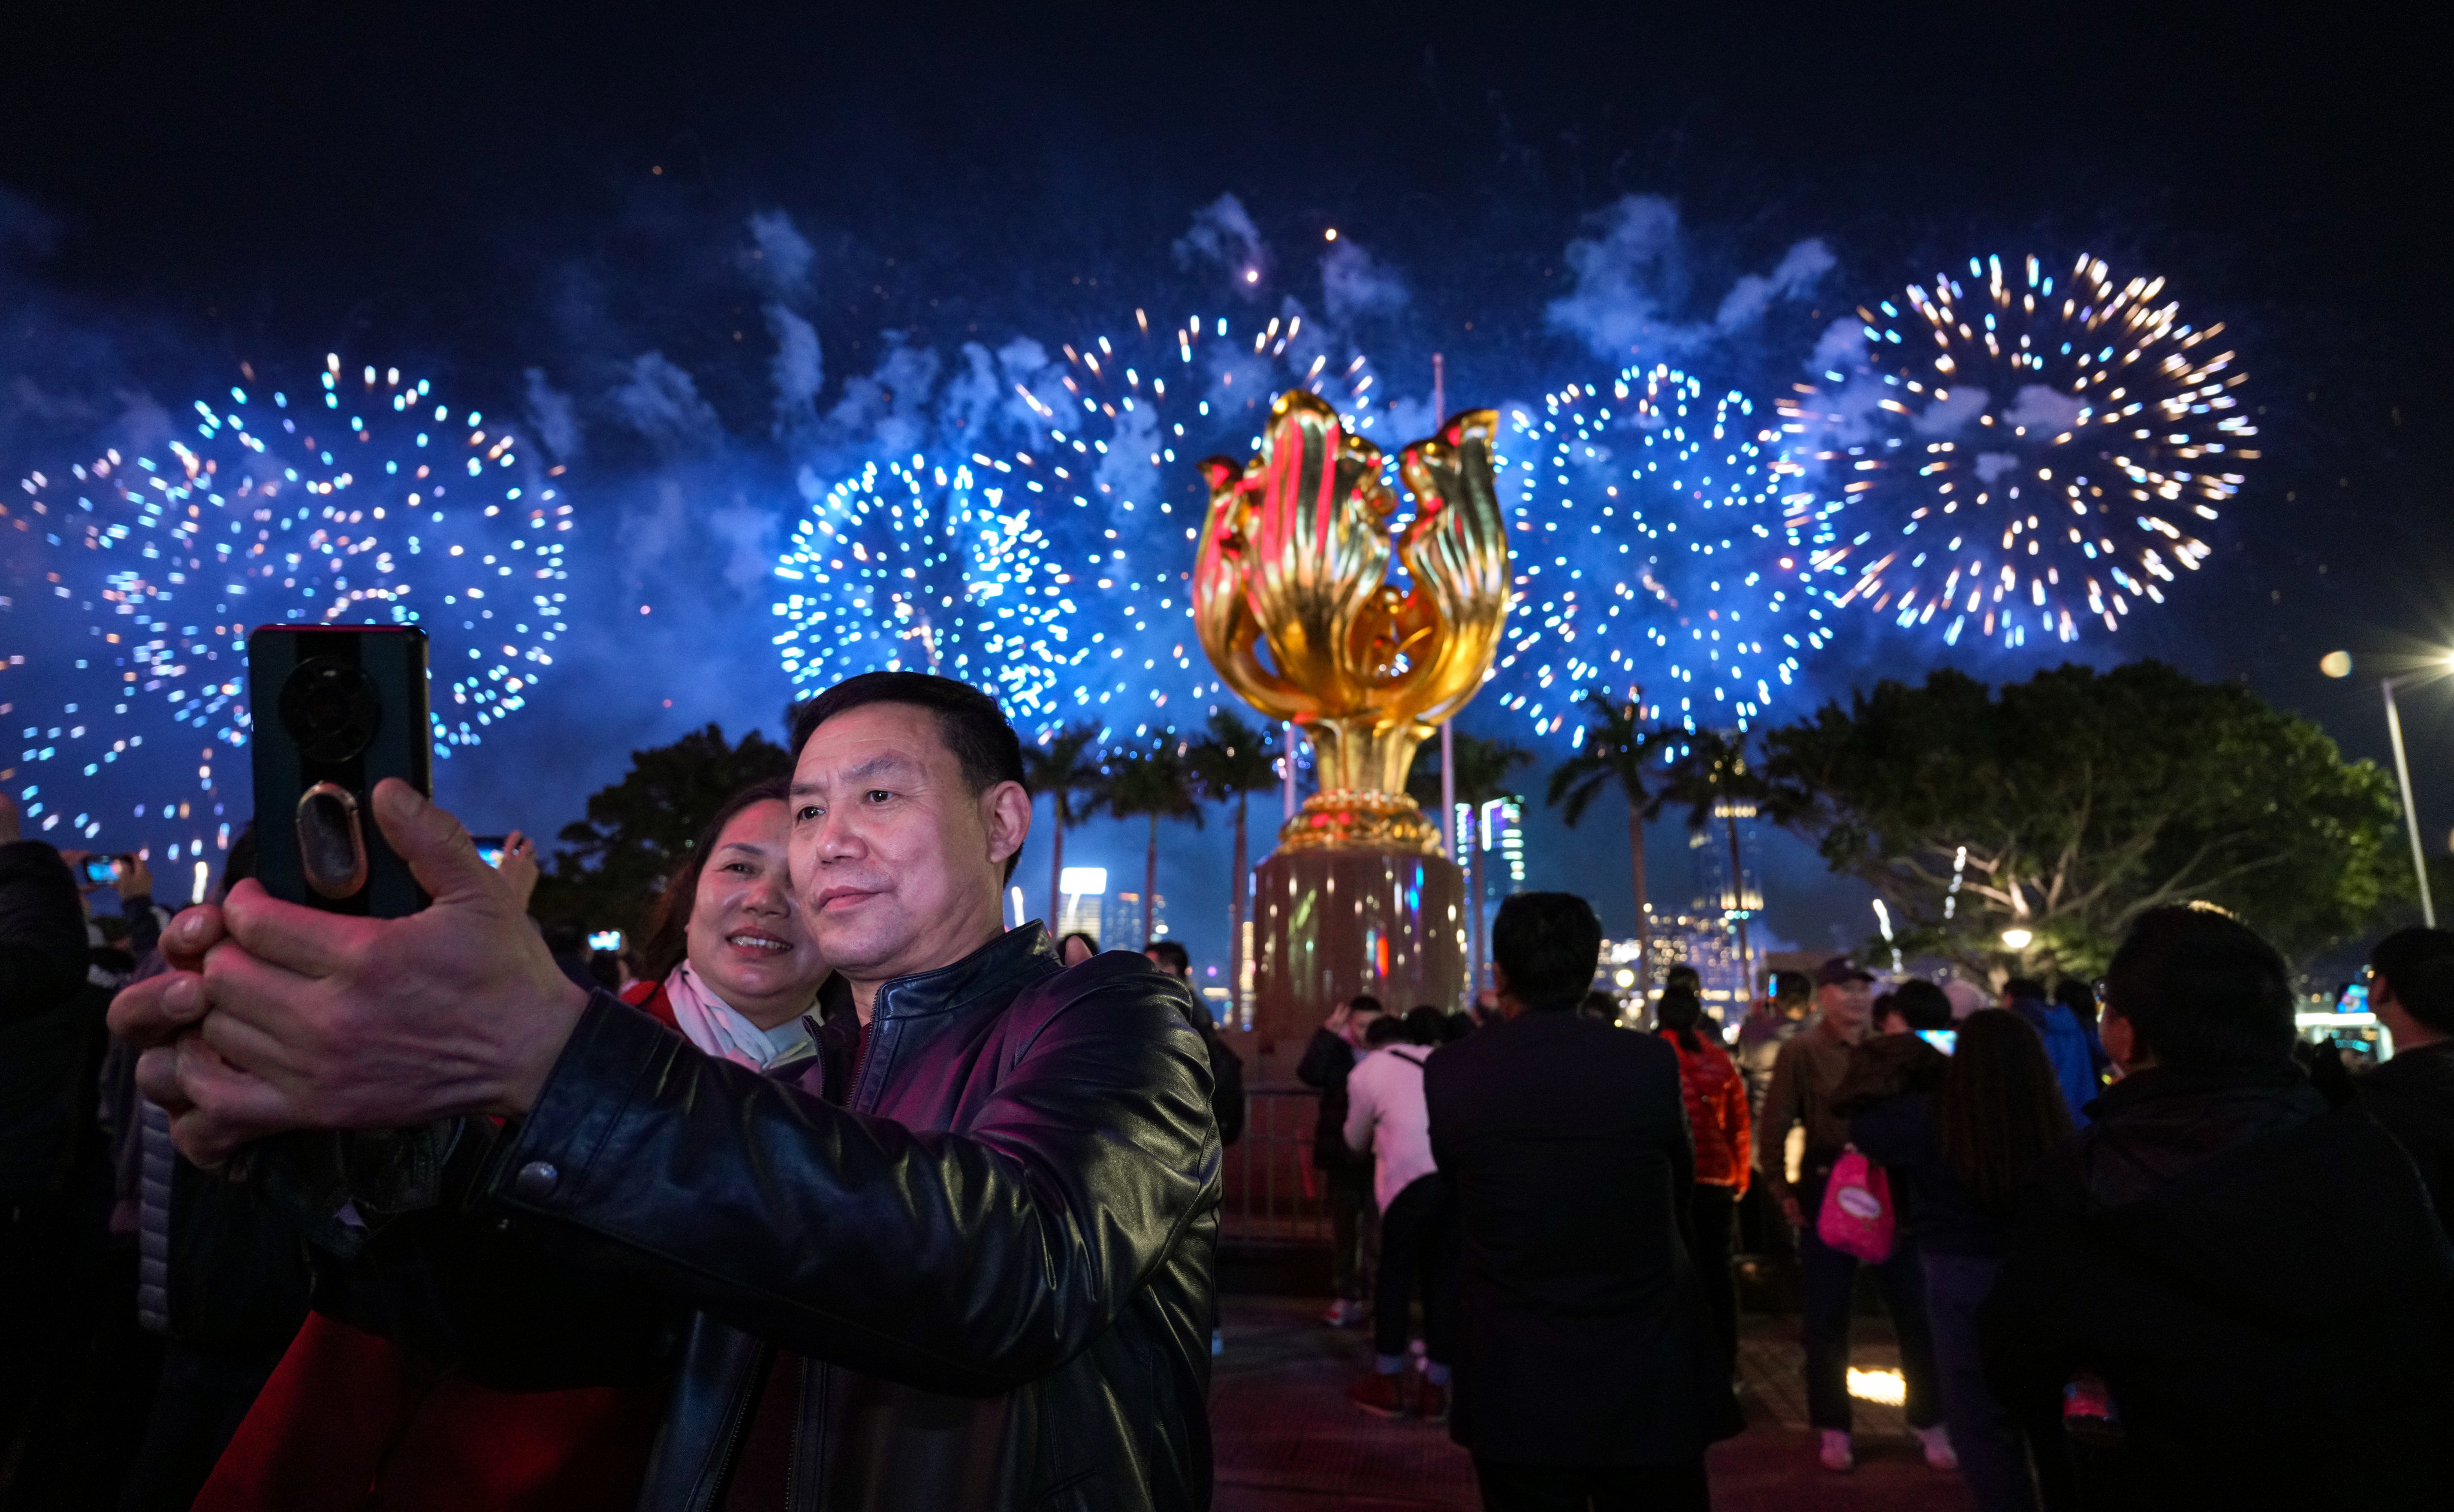 Visitors take a photograph, with a fireworks display to celebrate the Lunar New Year in the background, at Golden Bauhinia Squre in Wan Chai on February 11. Photo: Eugene Lee